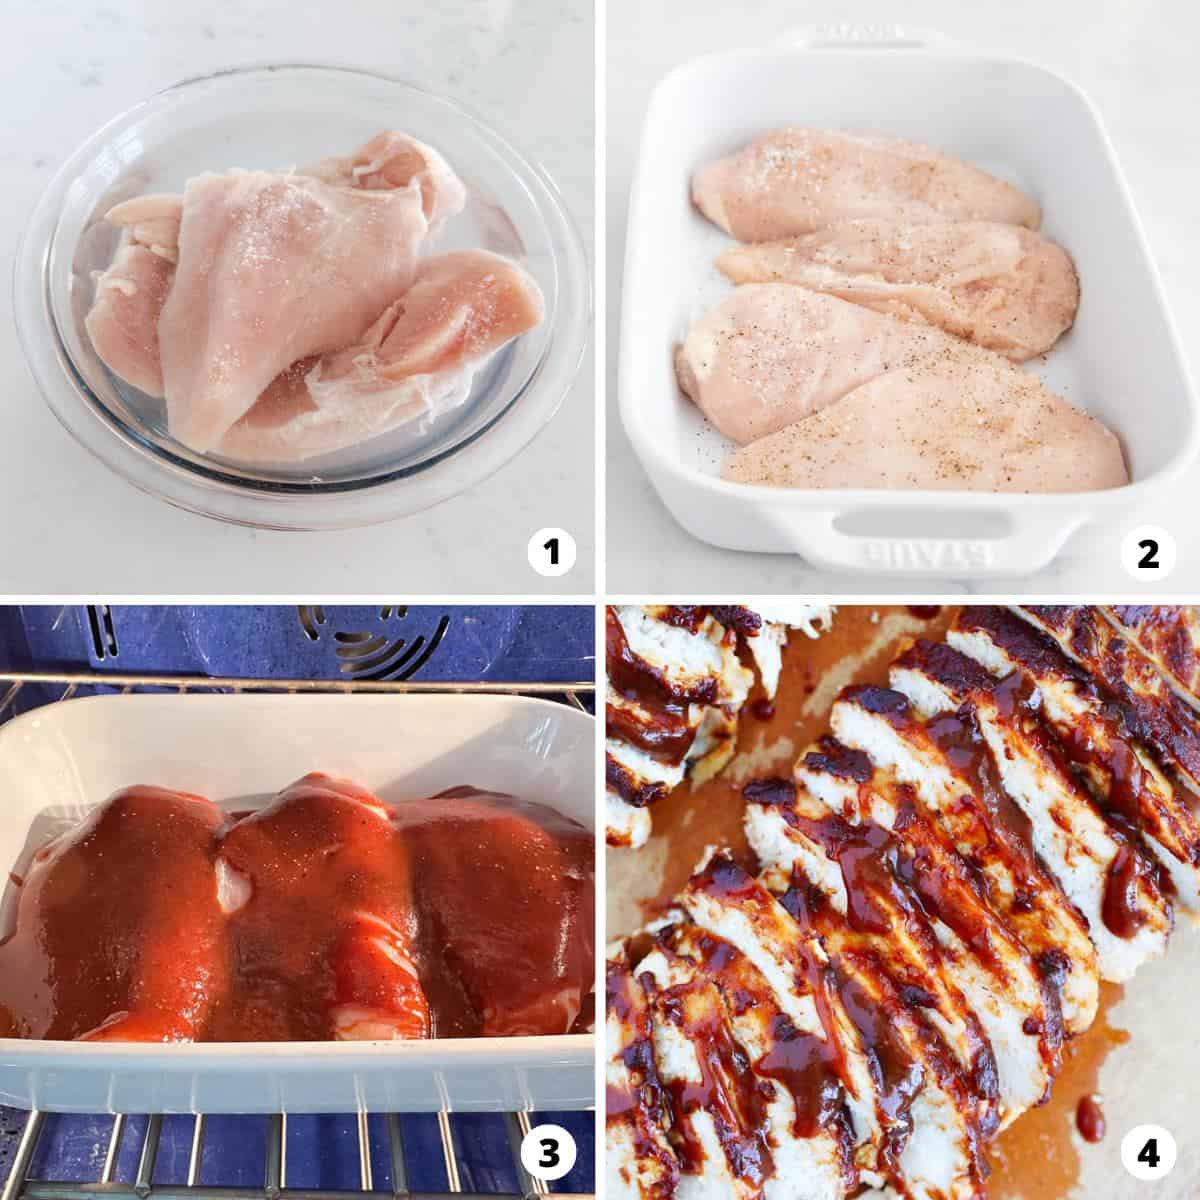 Showing how to bake bbq chicken in a 4 step collage. 